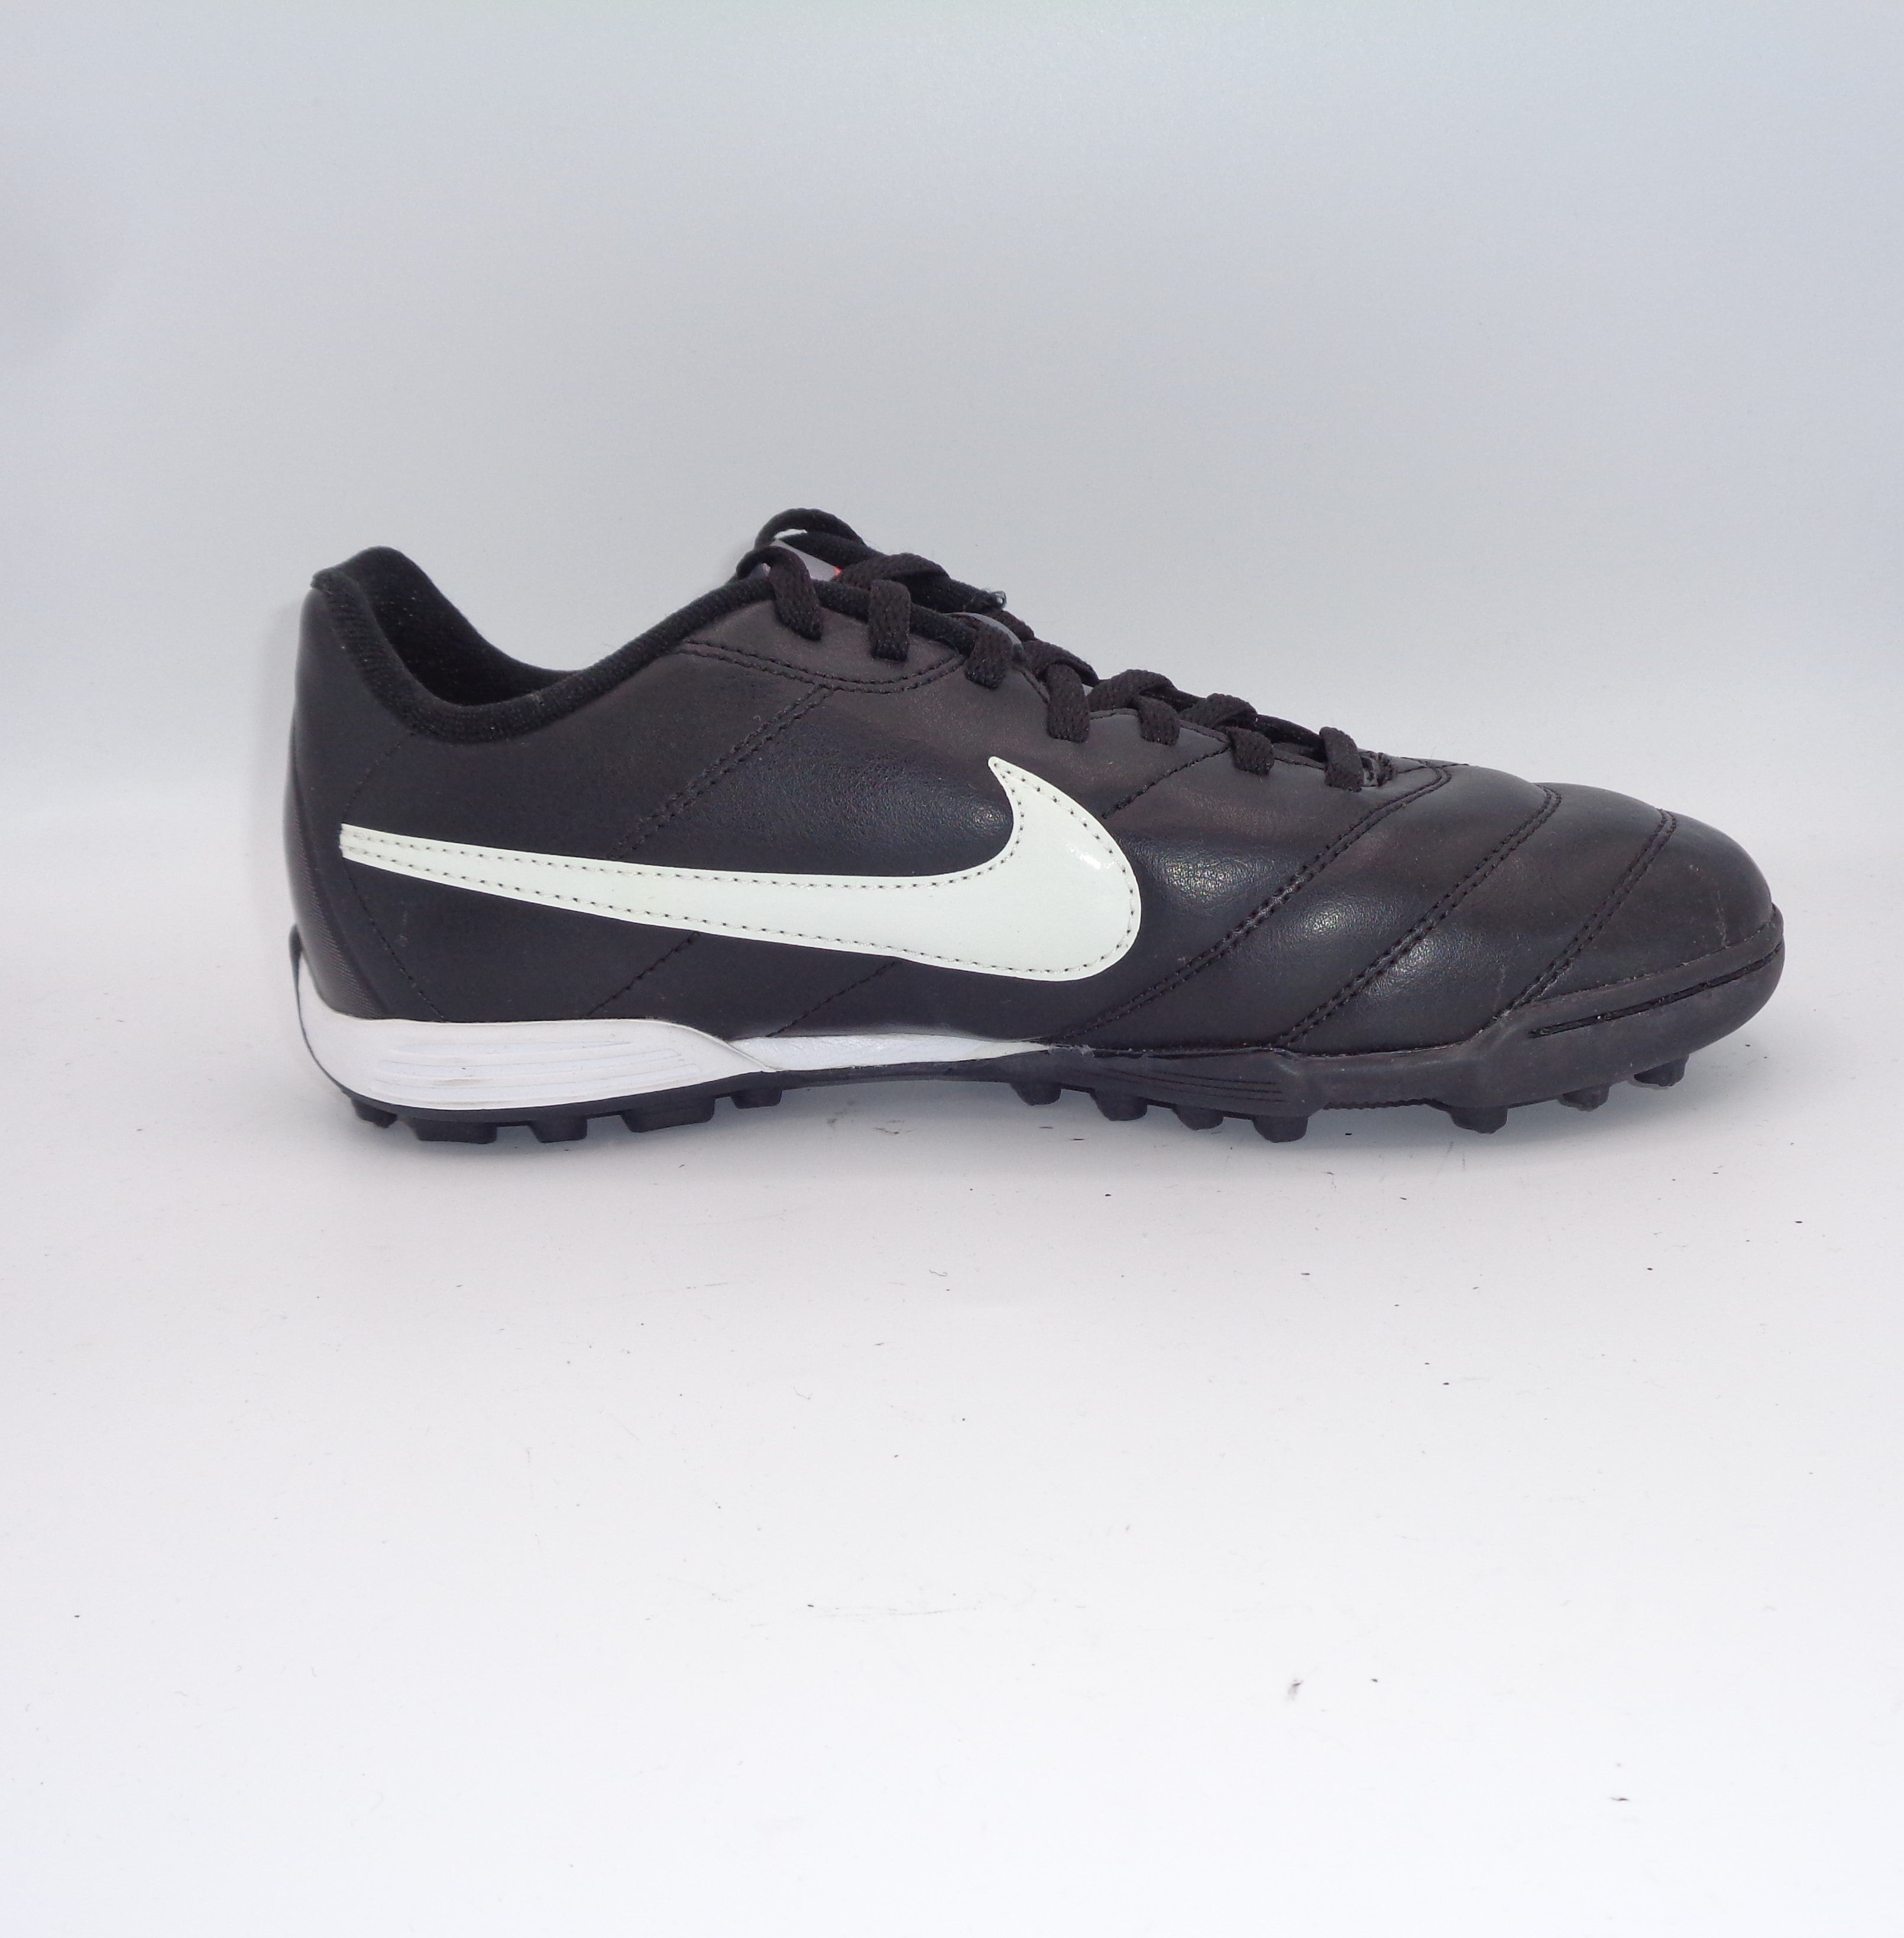 NIKE TIEMPO NATURAL III ASTRO FOOTBALL BOOTS - NIKE - SIZE 5.5